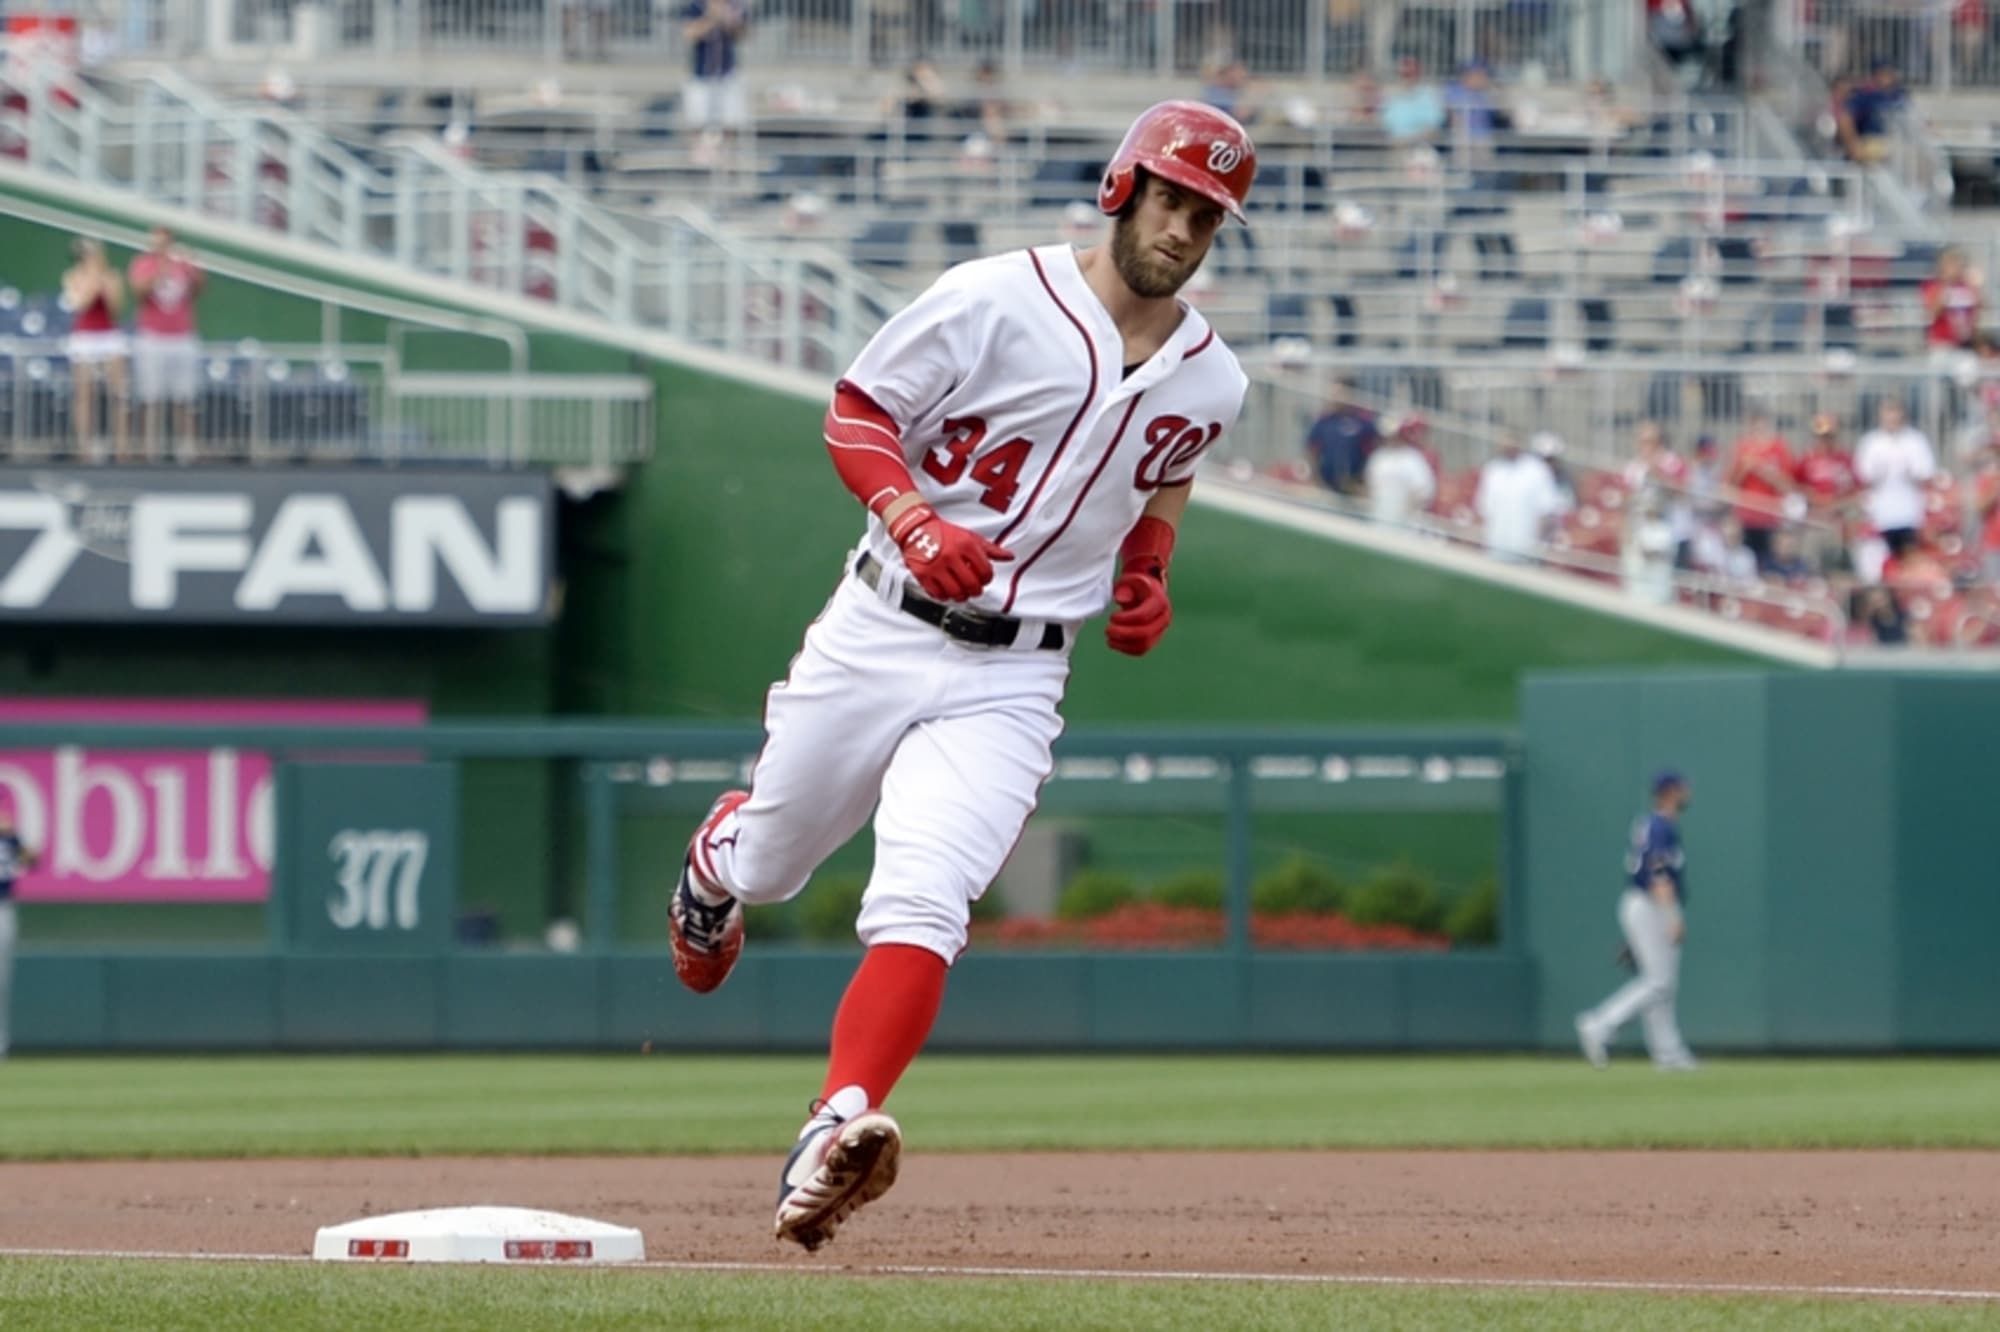 Bryce Harper gave a Washington Nationals fan the photo of a lifetime